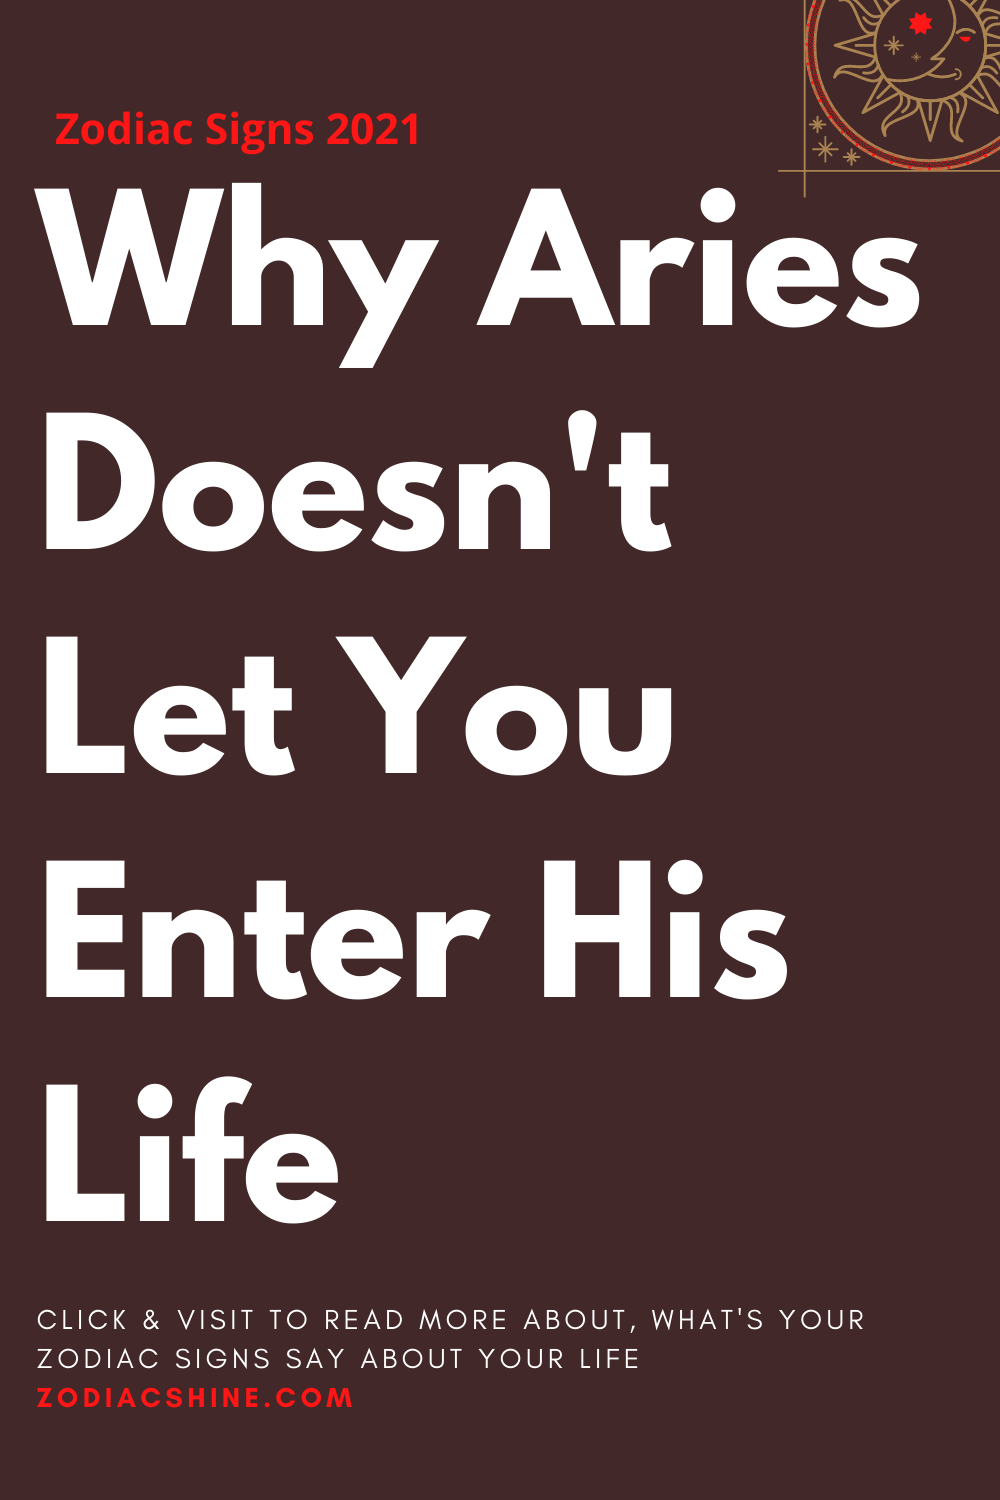 Why Aries Doesn't Let You Enter His Life